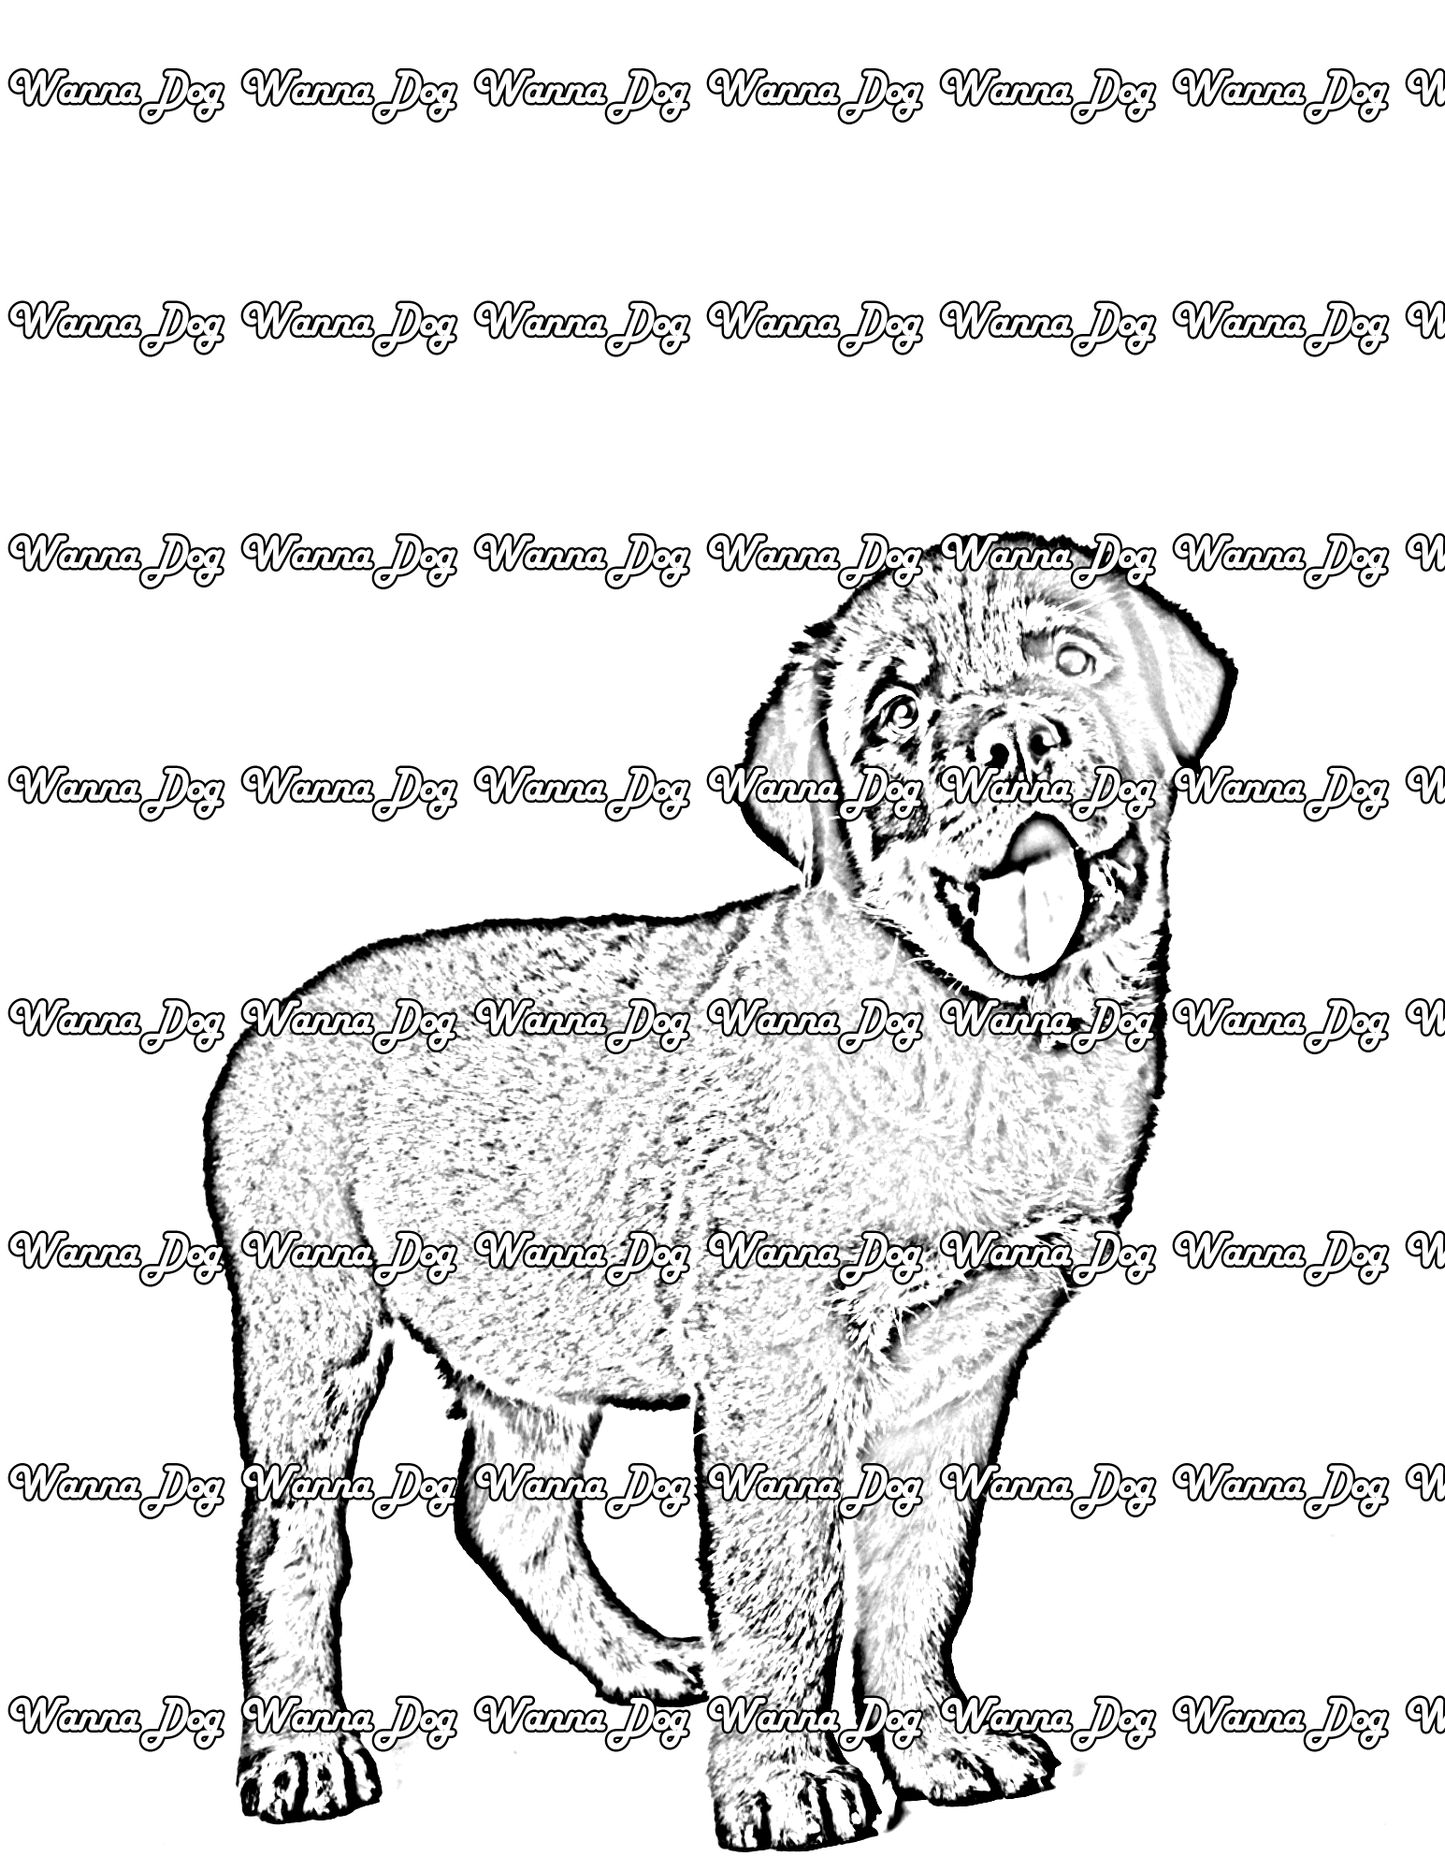 Rottweiler Puppy Coloring Page of a Rottweiler Puppy with their tongue out